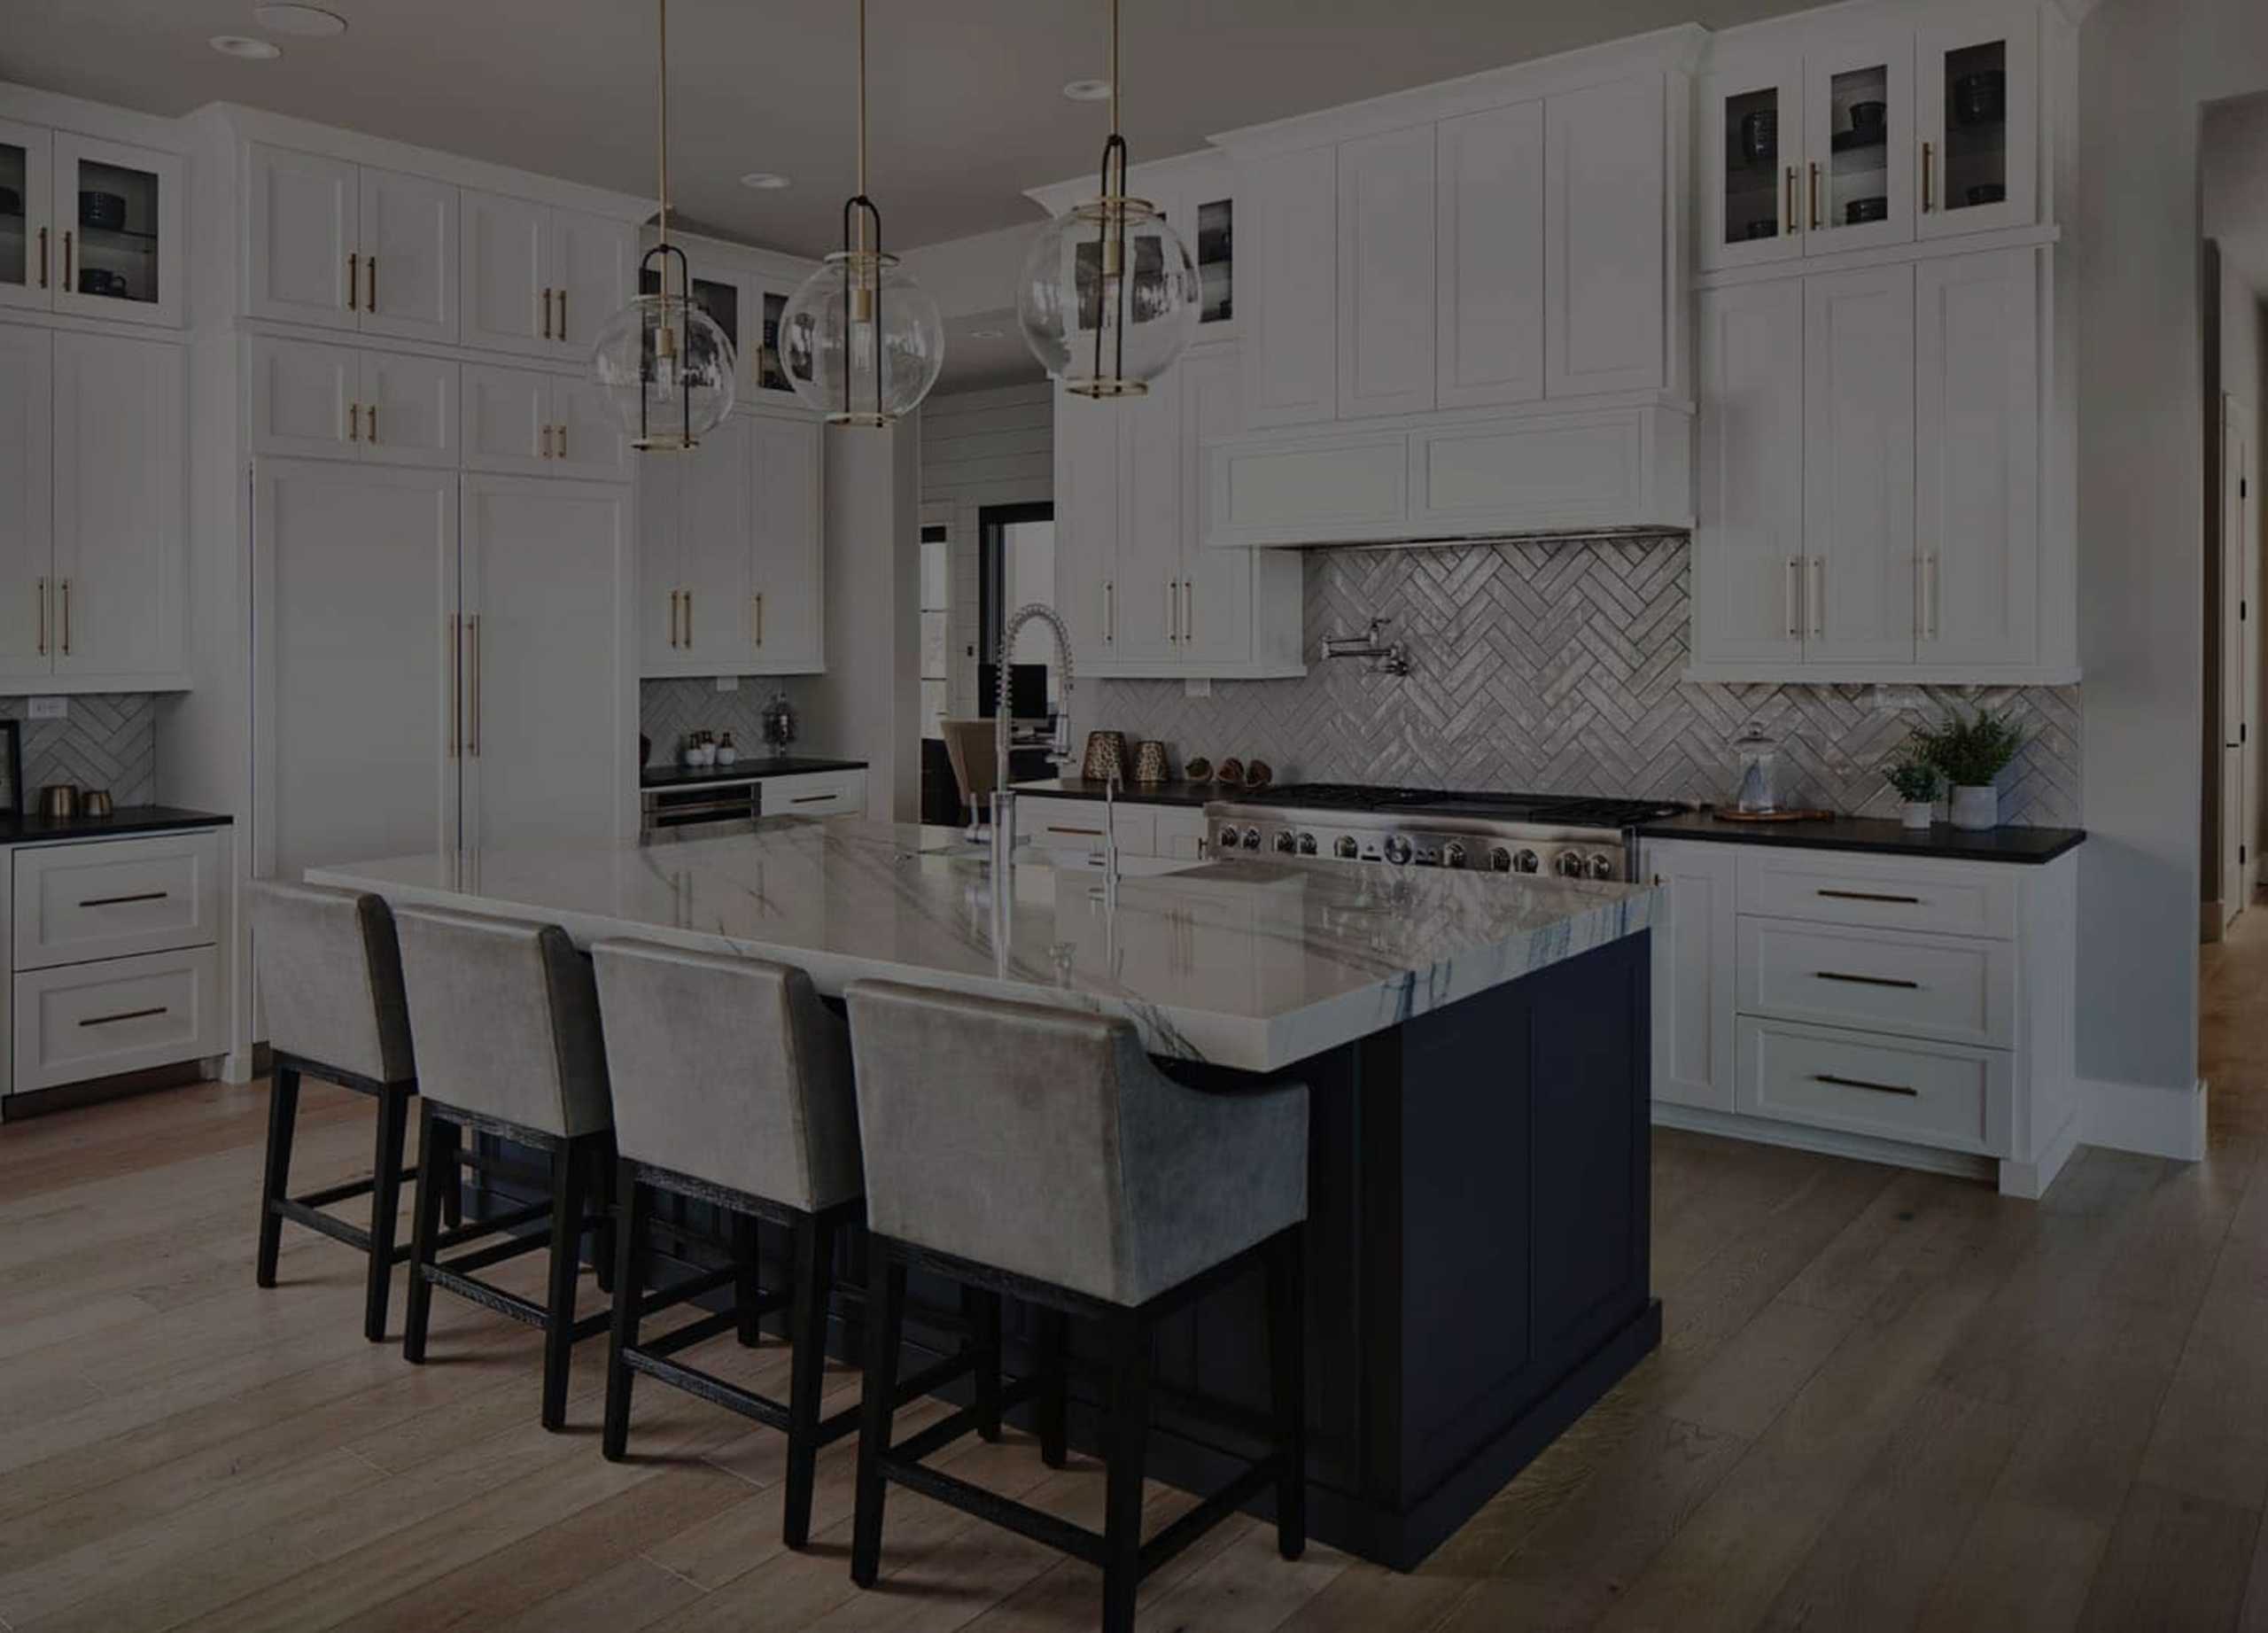 Charming & classically inspired kitchen